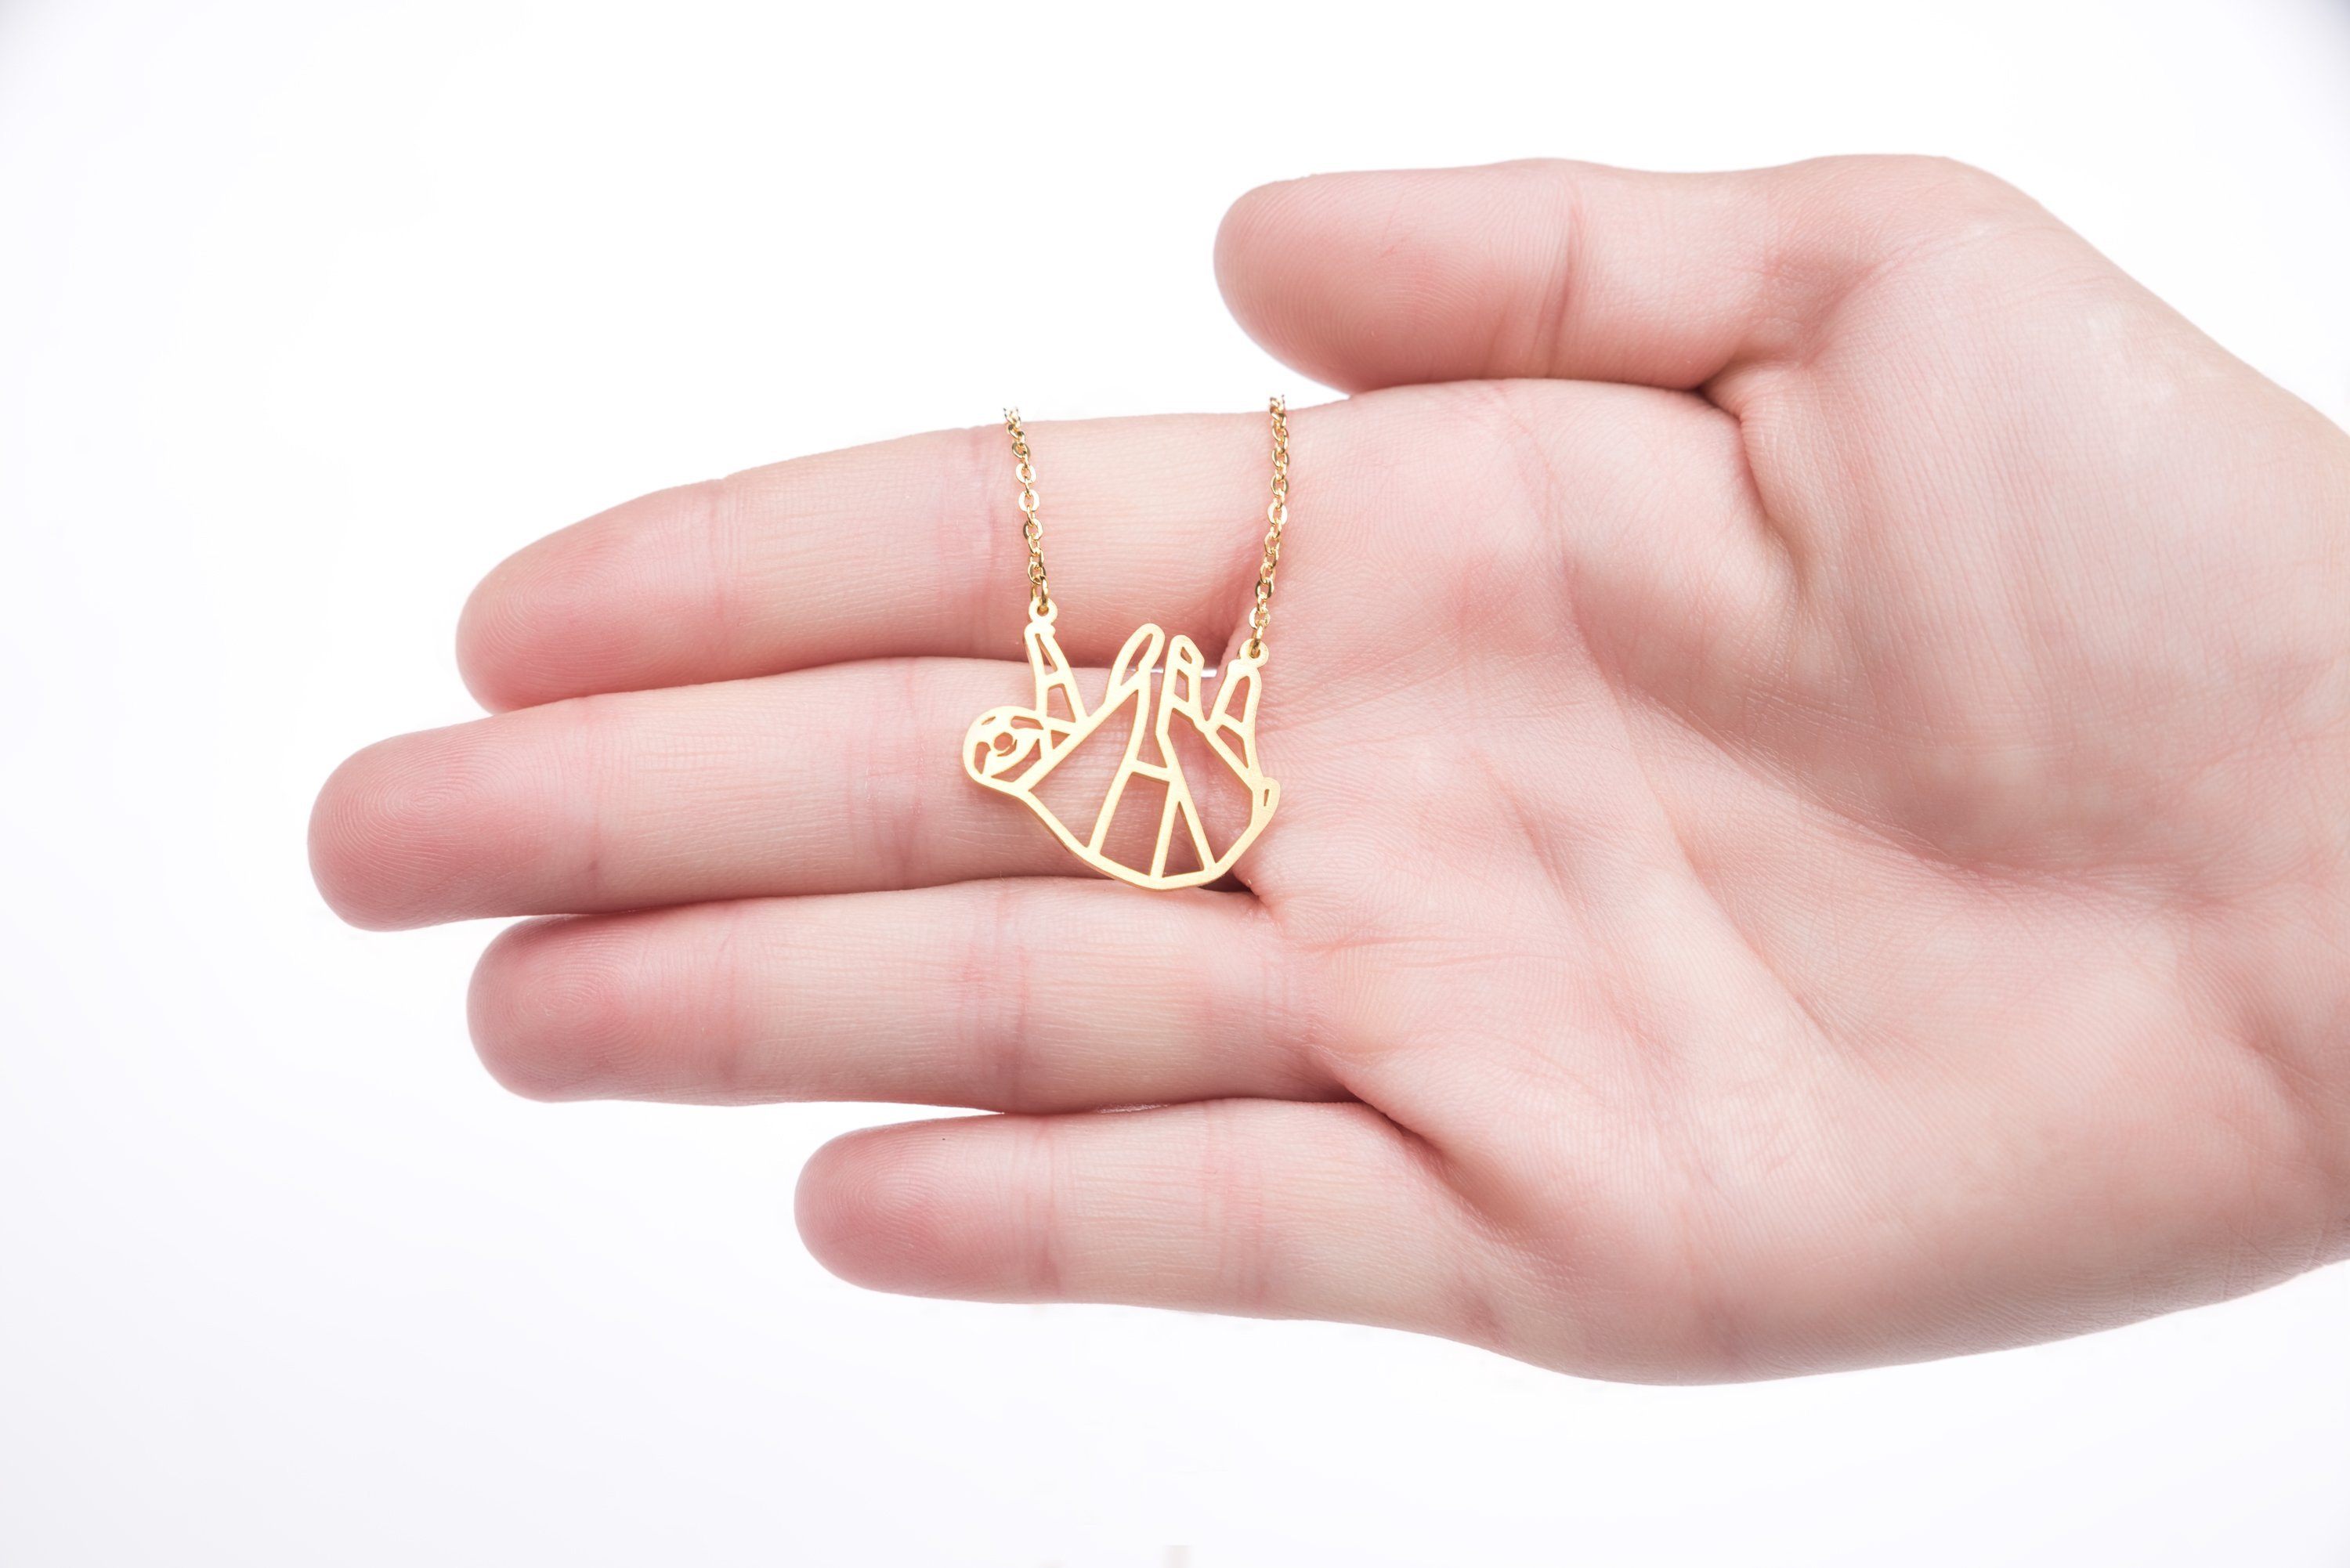 Sloth Gold Origami Geometric Necklace